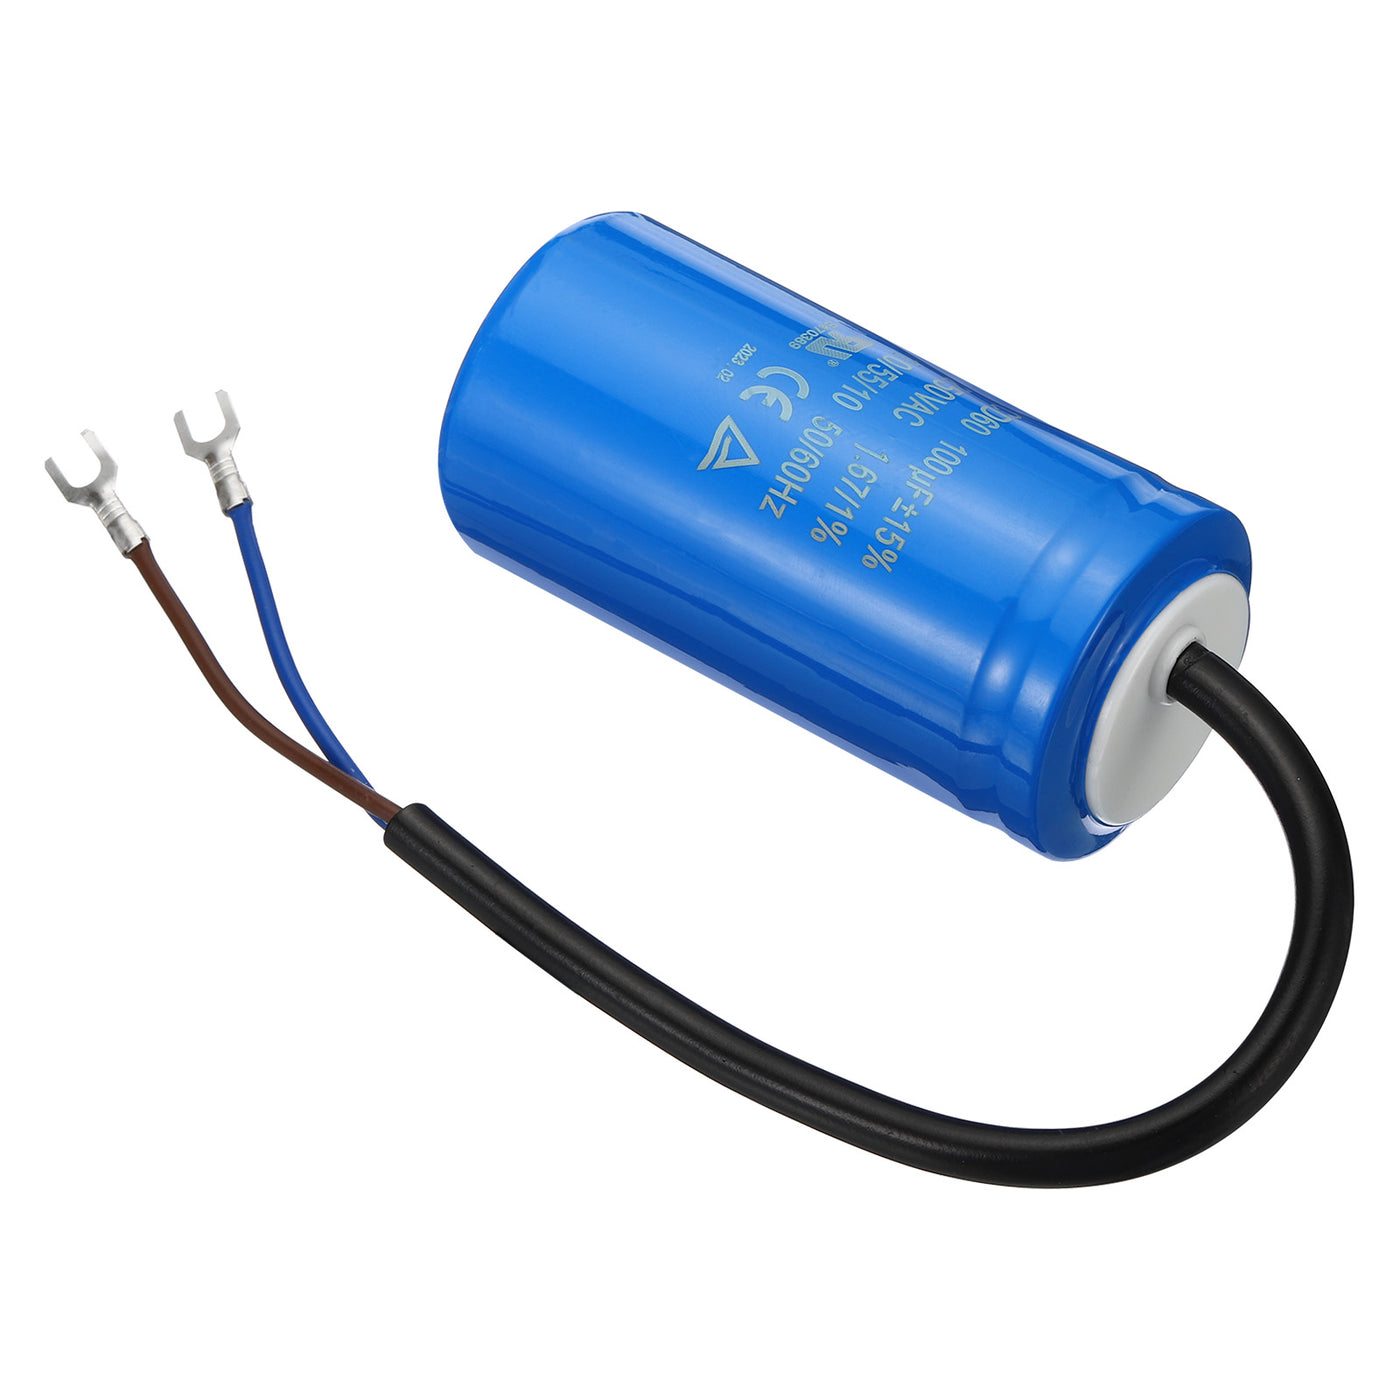 Harfington CD60 Run Capacitor, 100uF 250VAC 50/60Hz Motor Starting Capacitor with 2 Wires for Air Compressor Motor Starts Running